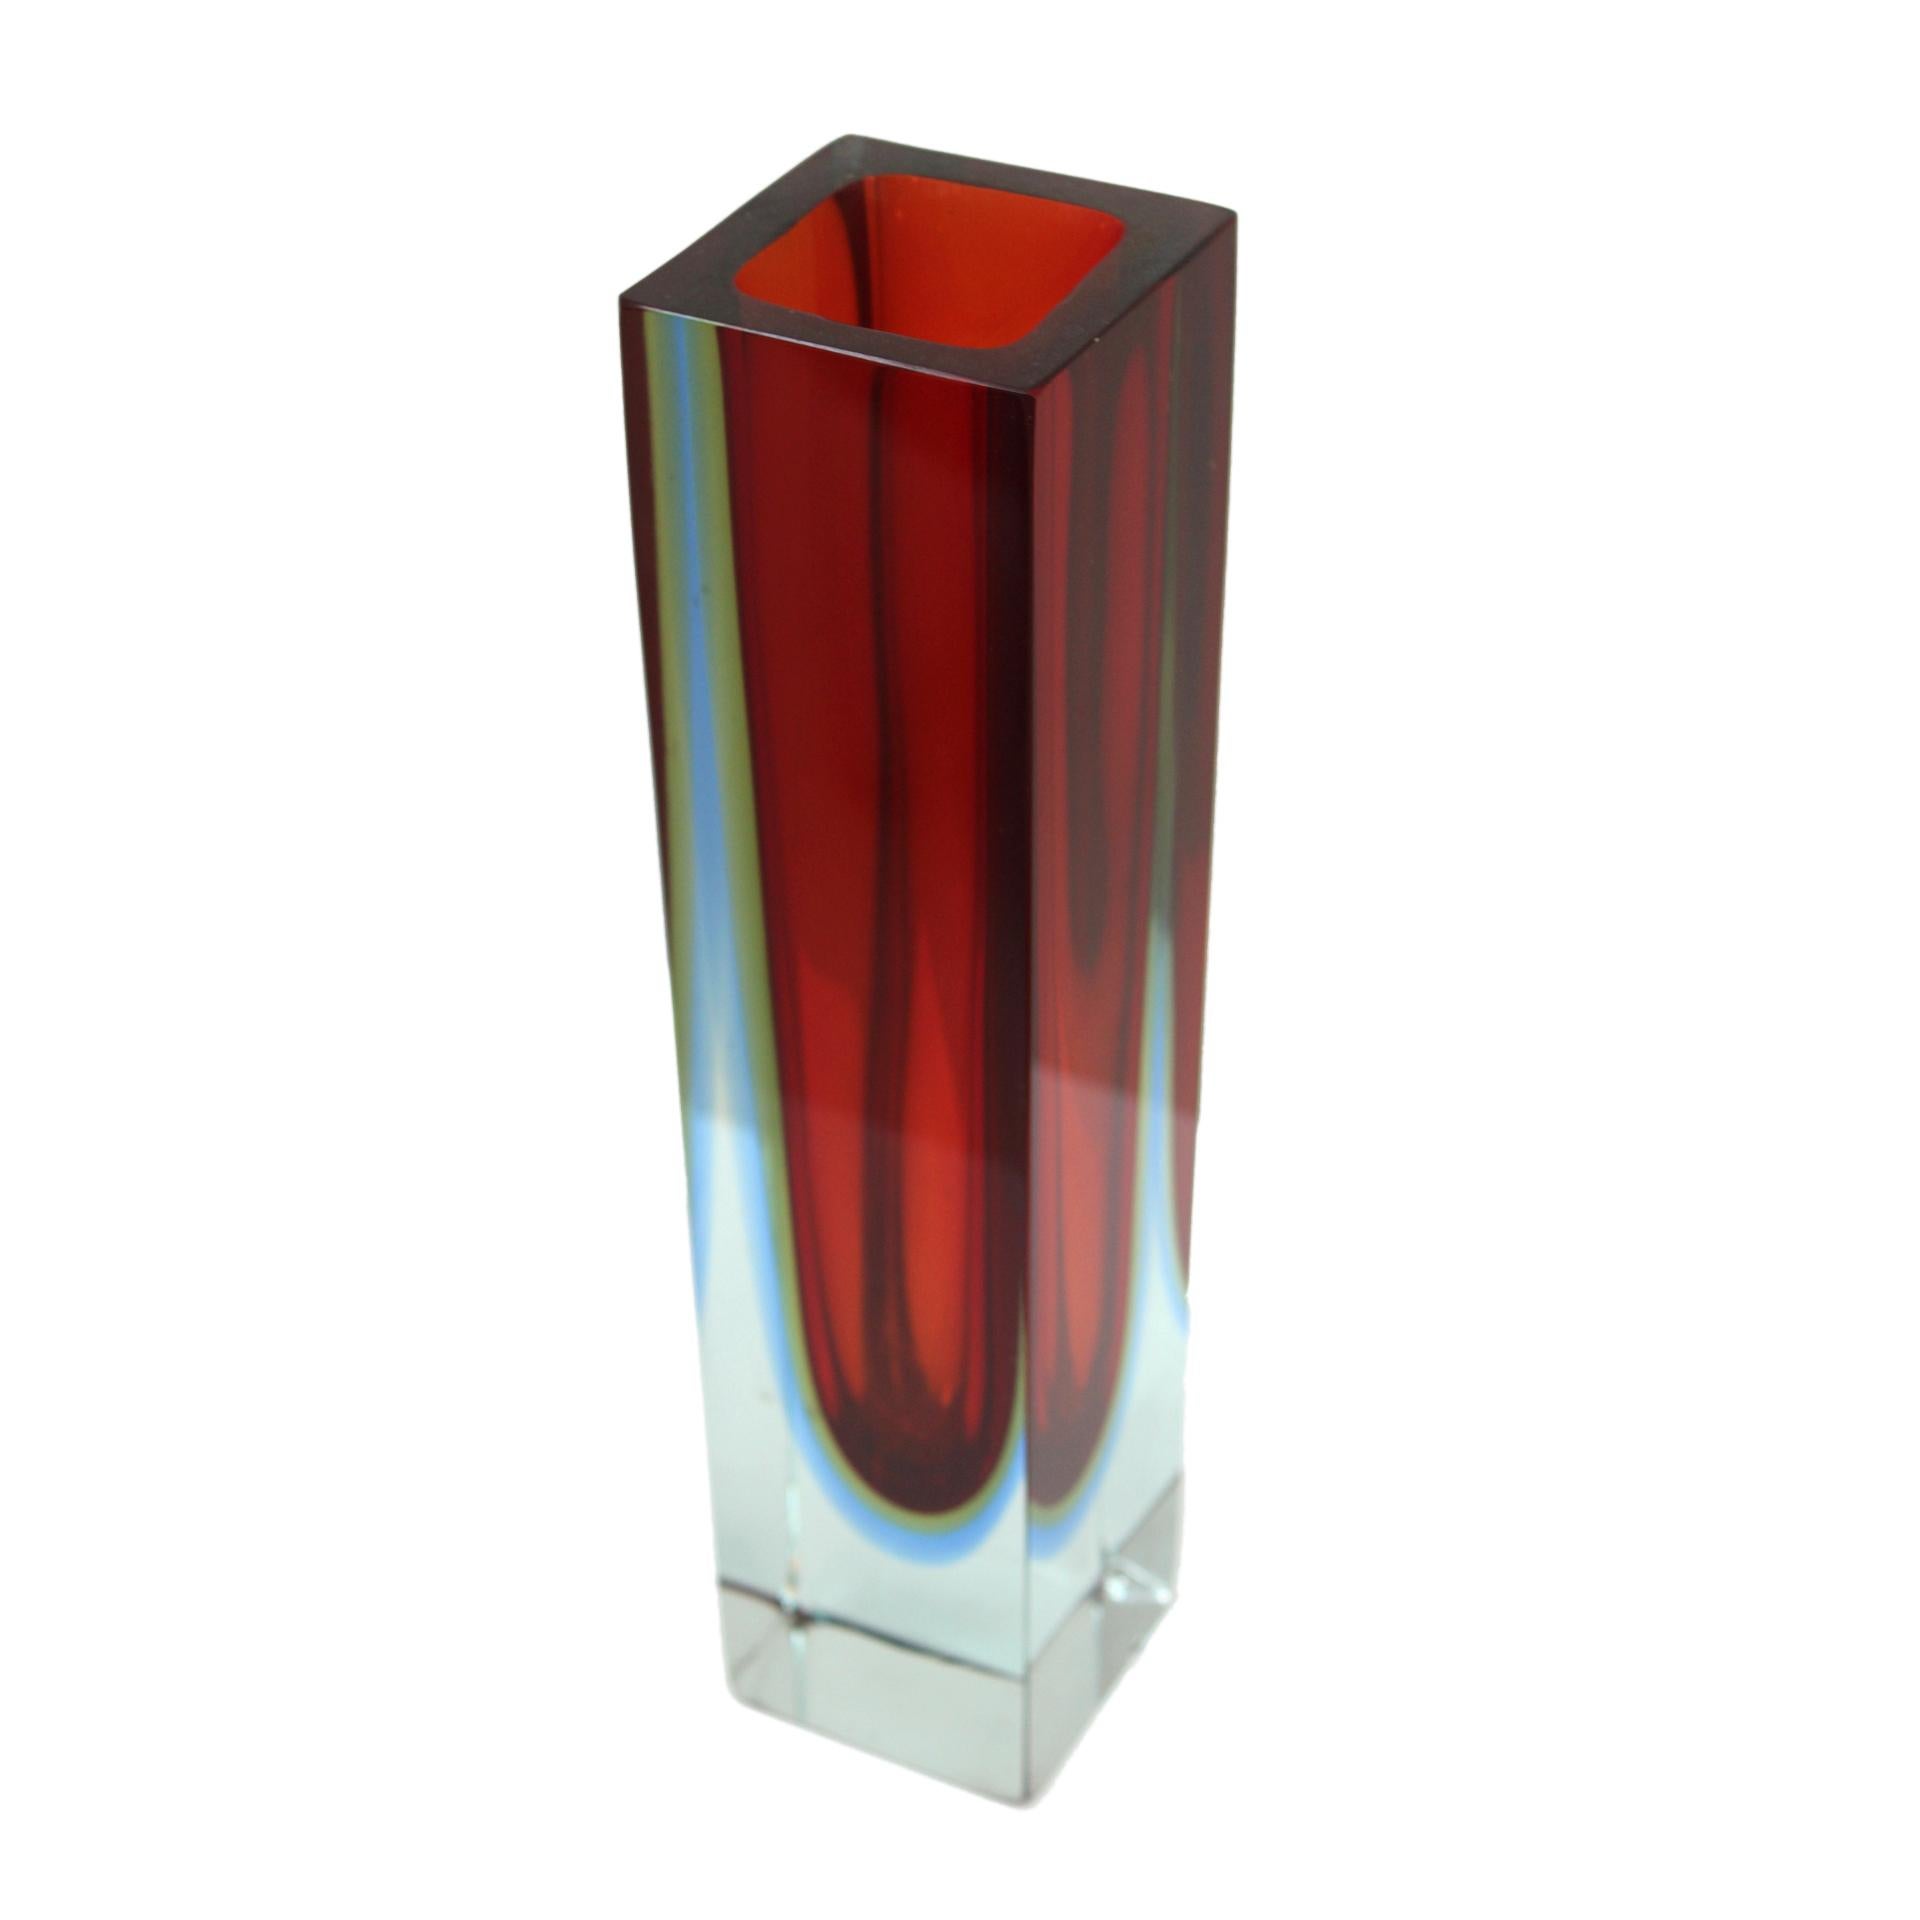 Italian Mid-Century Modern Red and Blue Sommerso Murano Glass Vase by Flavio Poli 1950 For Sale